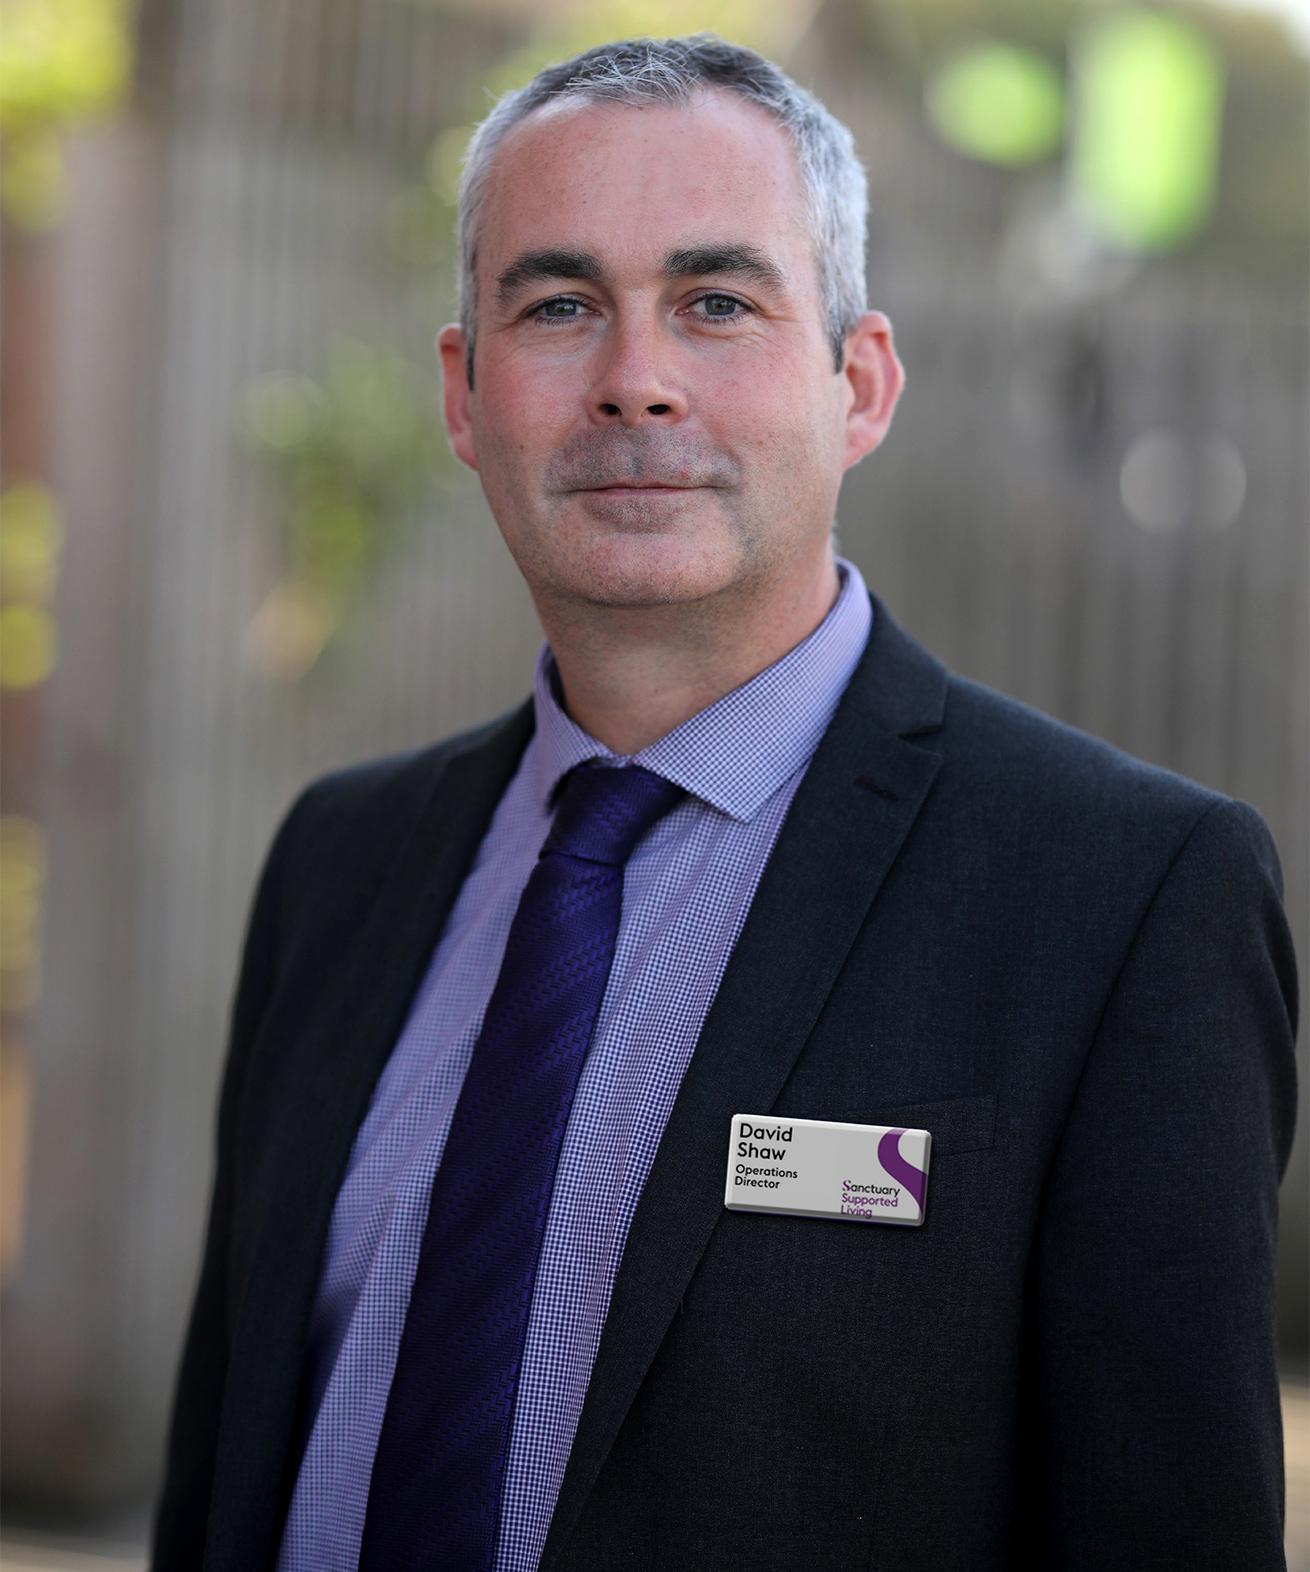 Dave Shaw, newly appointed Operations Director of Sanctuary Supported Living